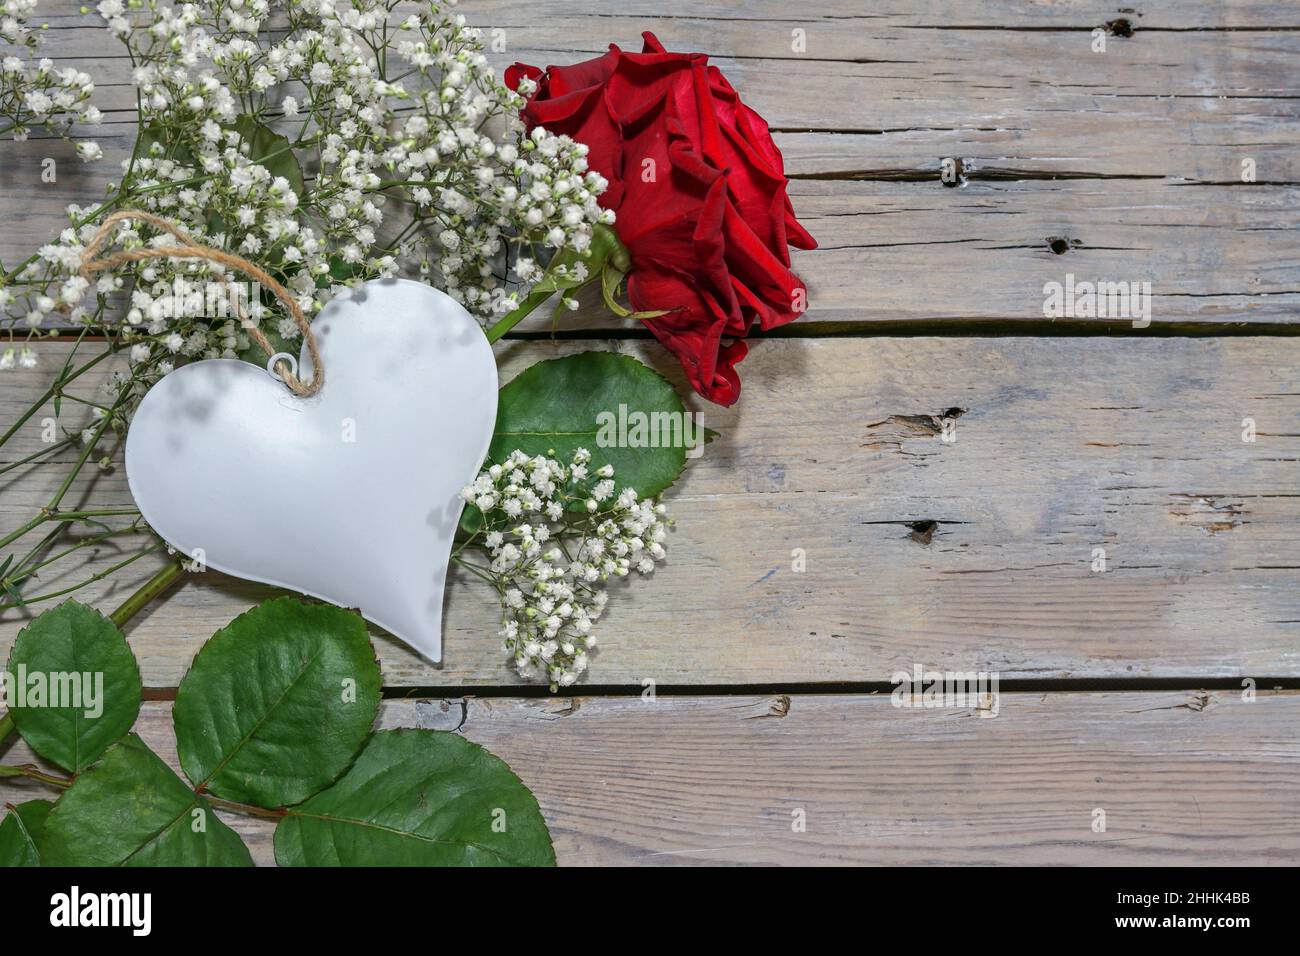 Red rose and a white heart on rustic wooden planks, romantic greeting card for Valentine's Day or Mother’s Day and for all who are loved, copy space, Stock Photo